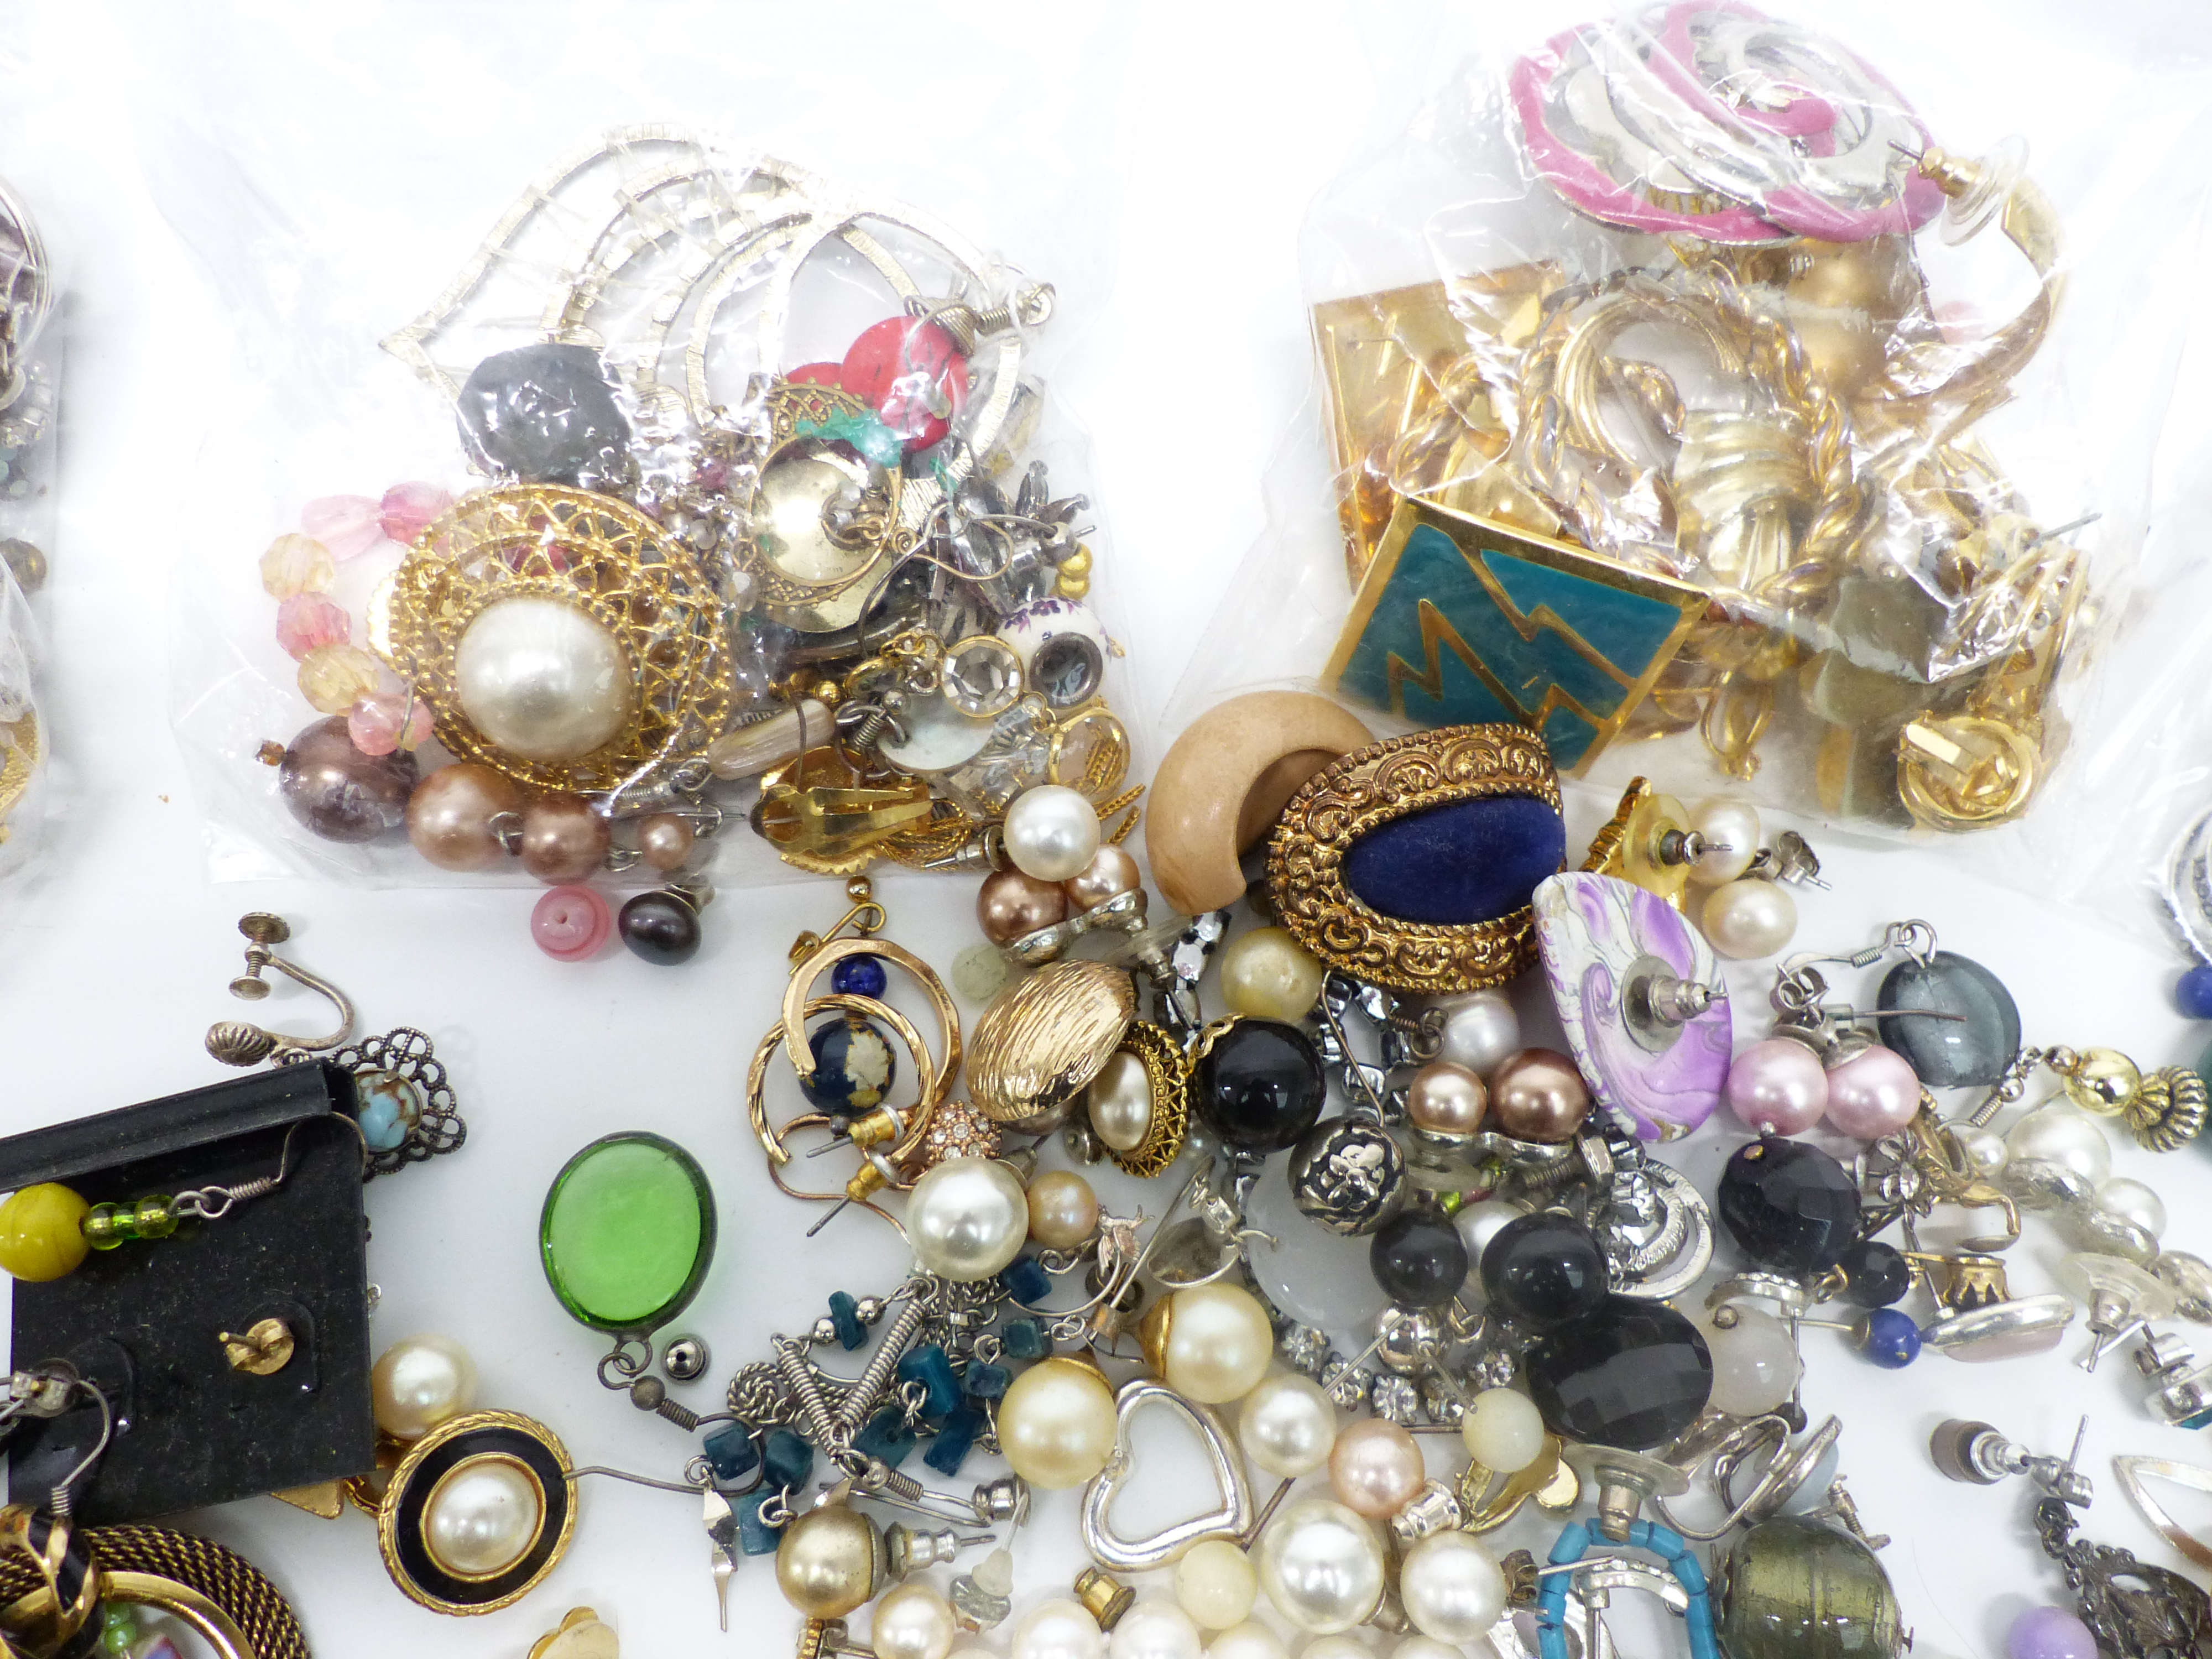 A collection of vintage earrings, vintage swallow brooch, etc - Image 2 of 2